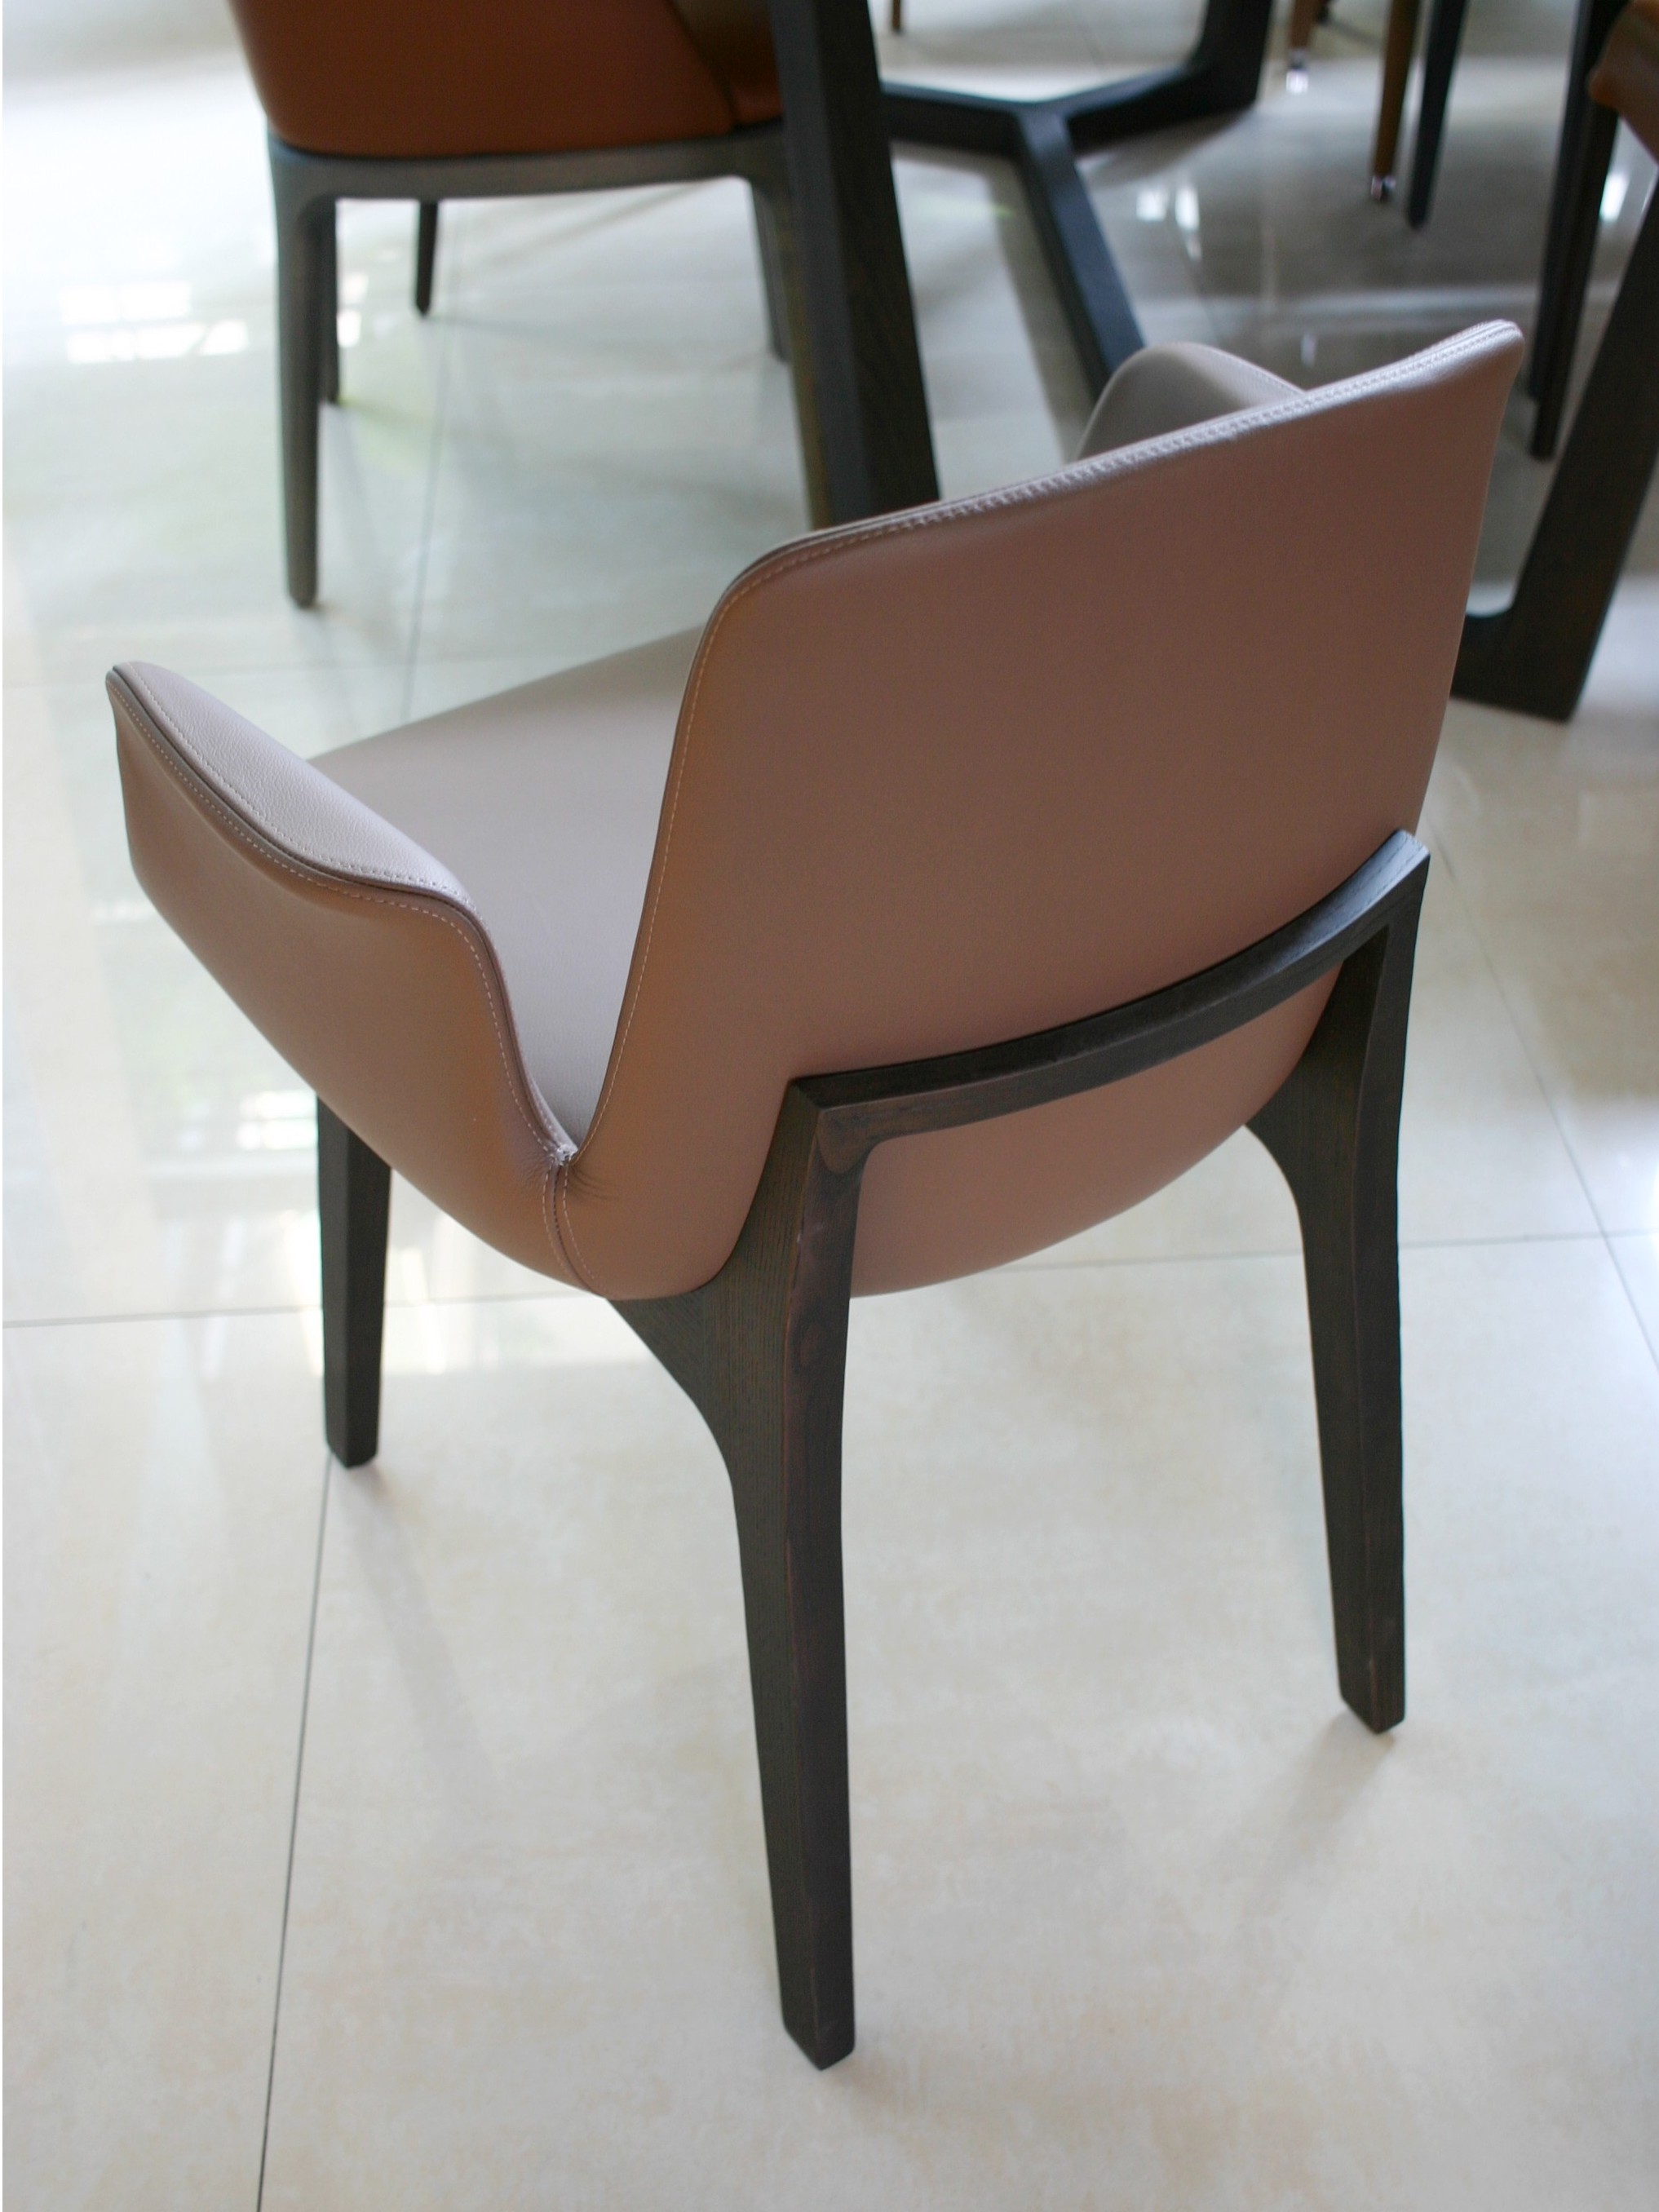 Poliform Ventura chair with arms (sold) - 德韻國際